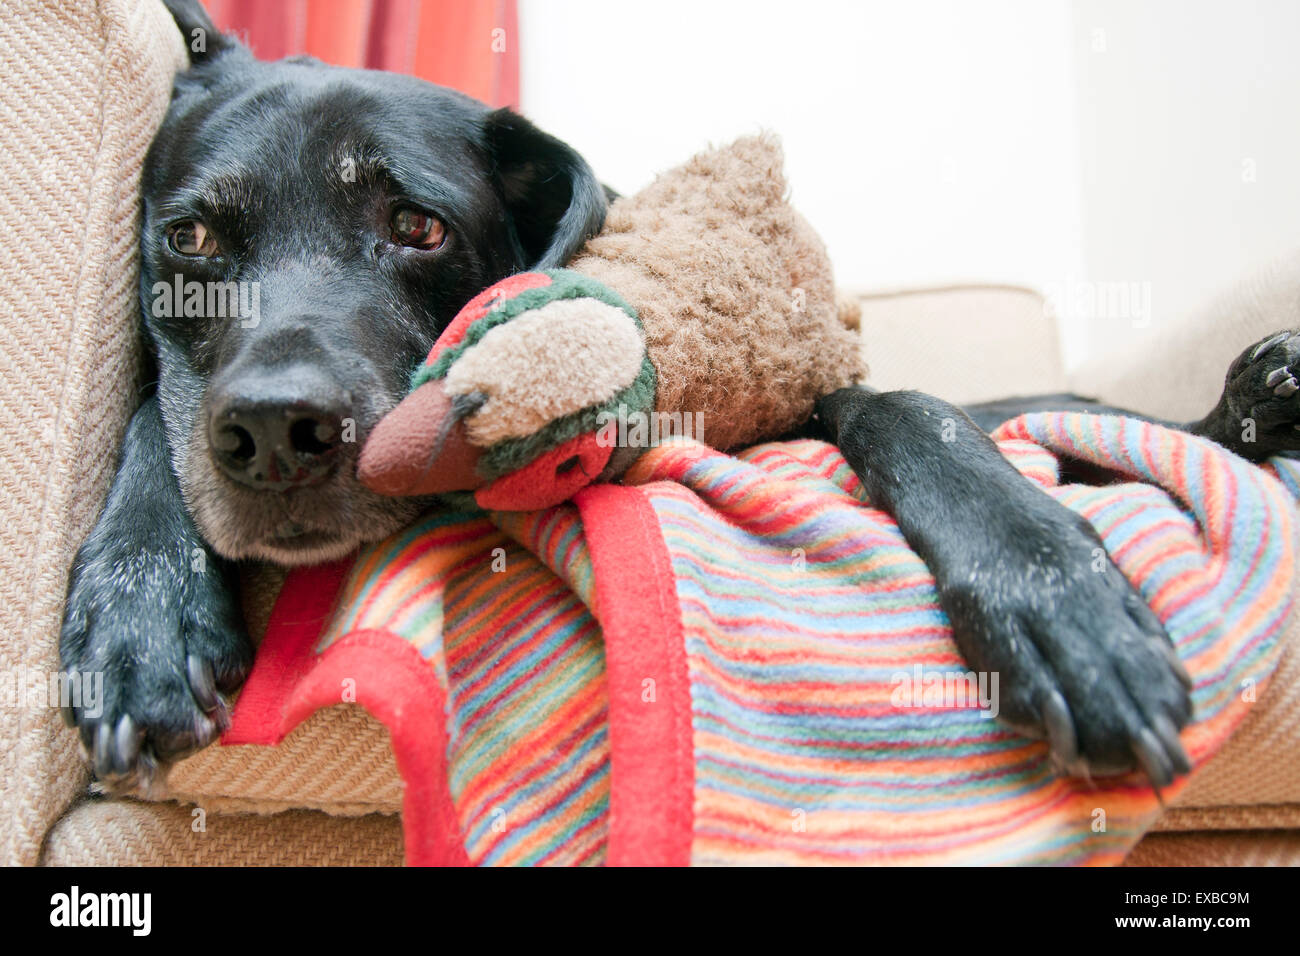 Elderly black labrador, single male adult playing with pheasant toy Stock Photo